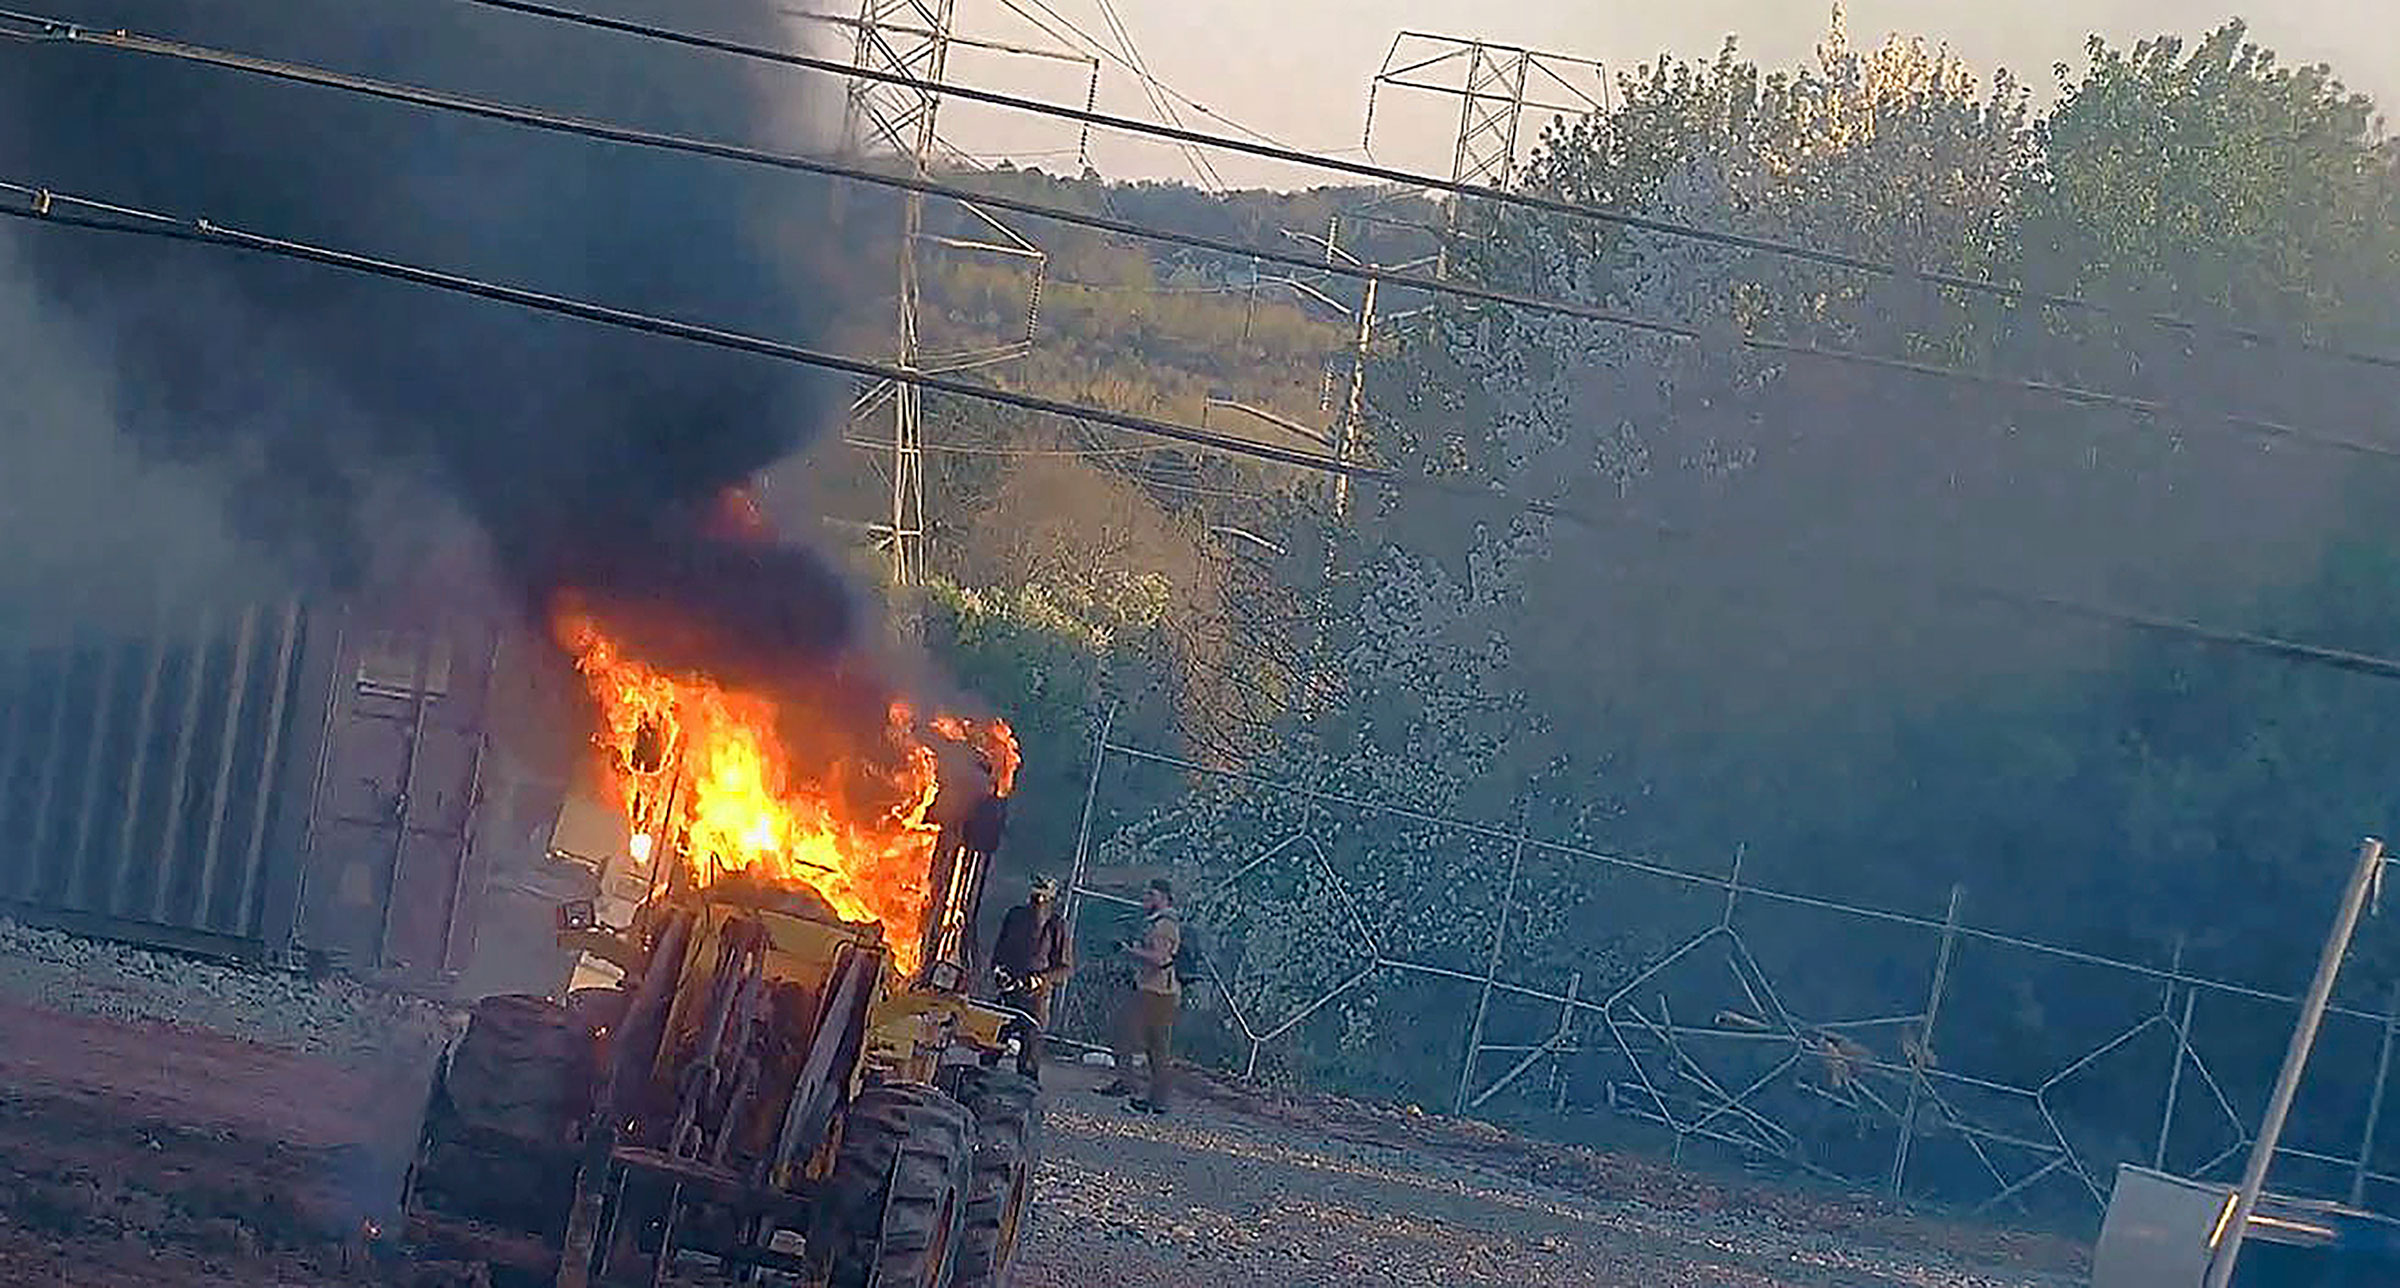 Construction equipment was set on fire on March 4, 2023 by a group protesting the proposed public safety training center, according to police.  (Atlanta Police Department/AP)